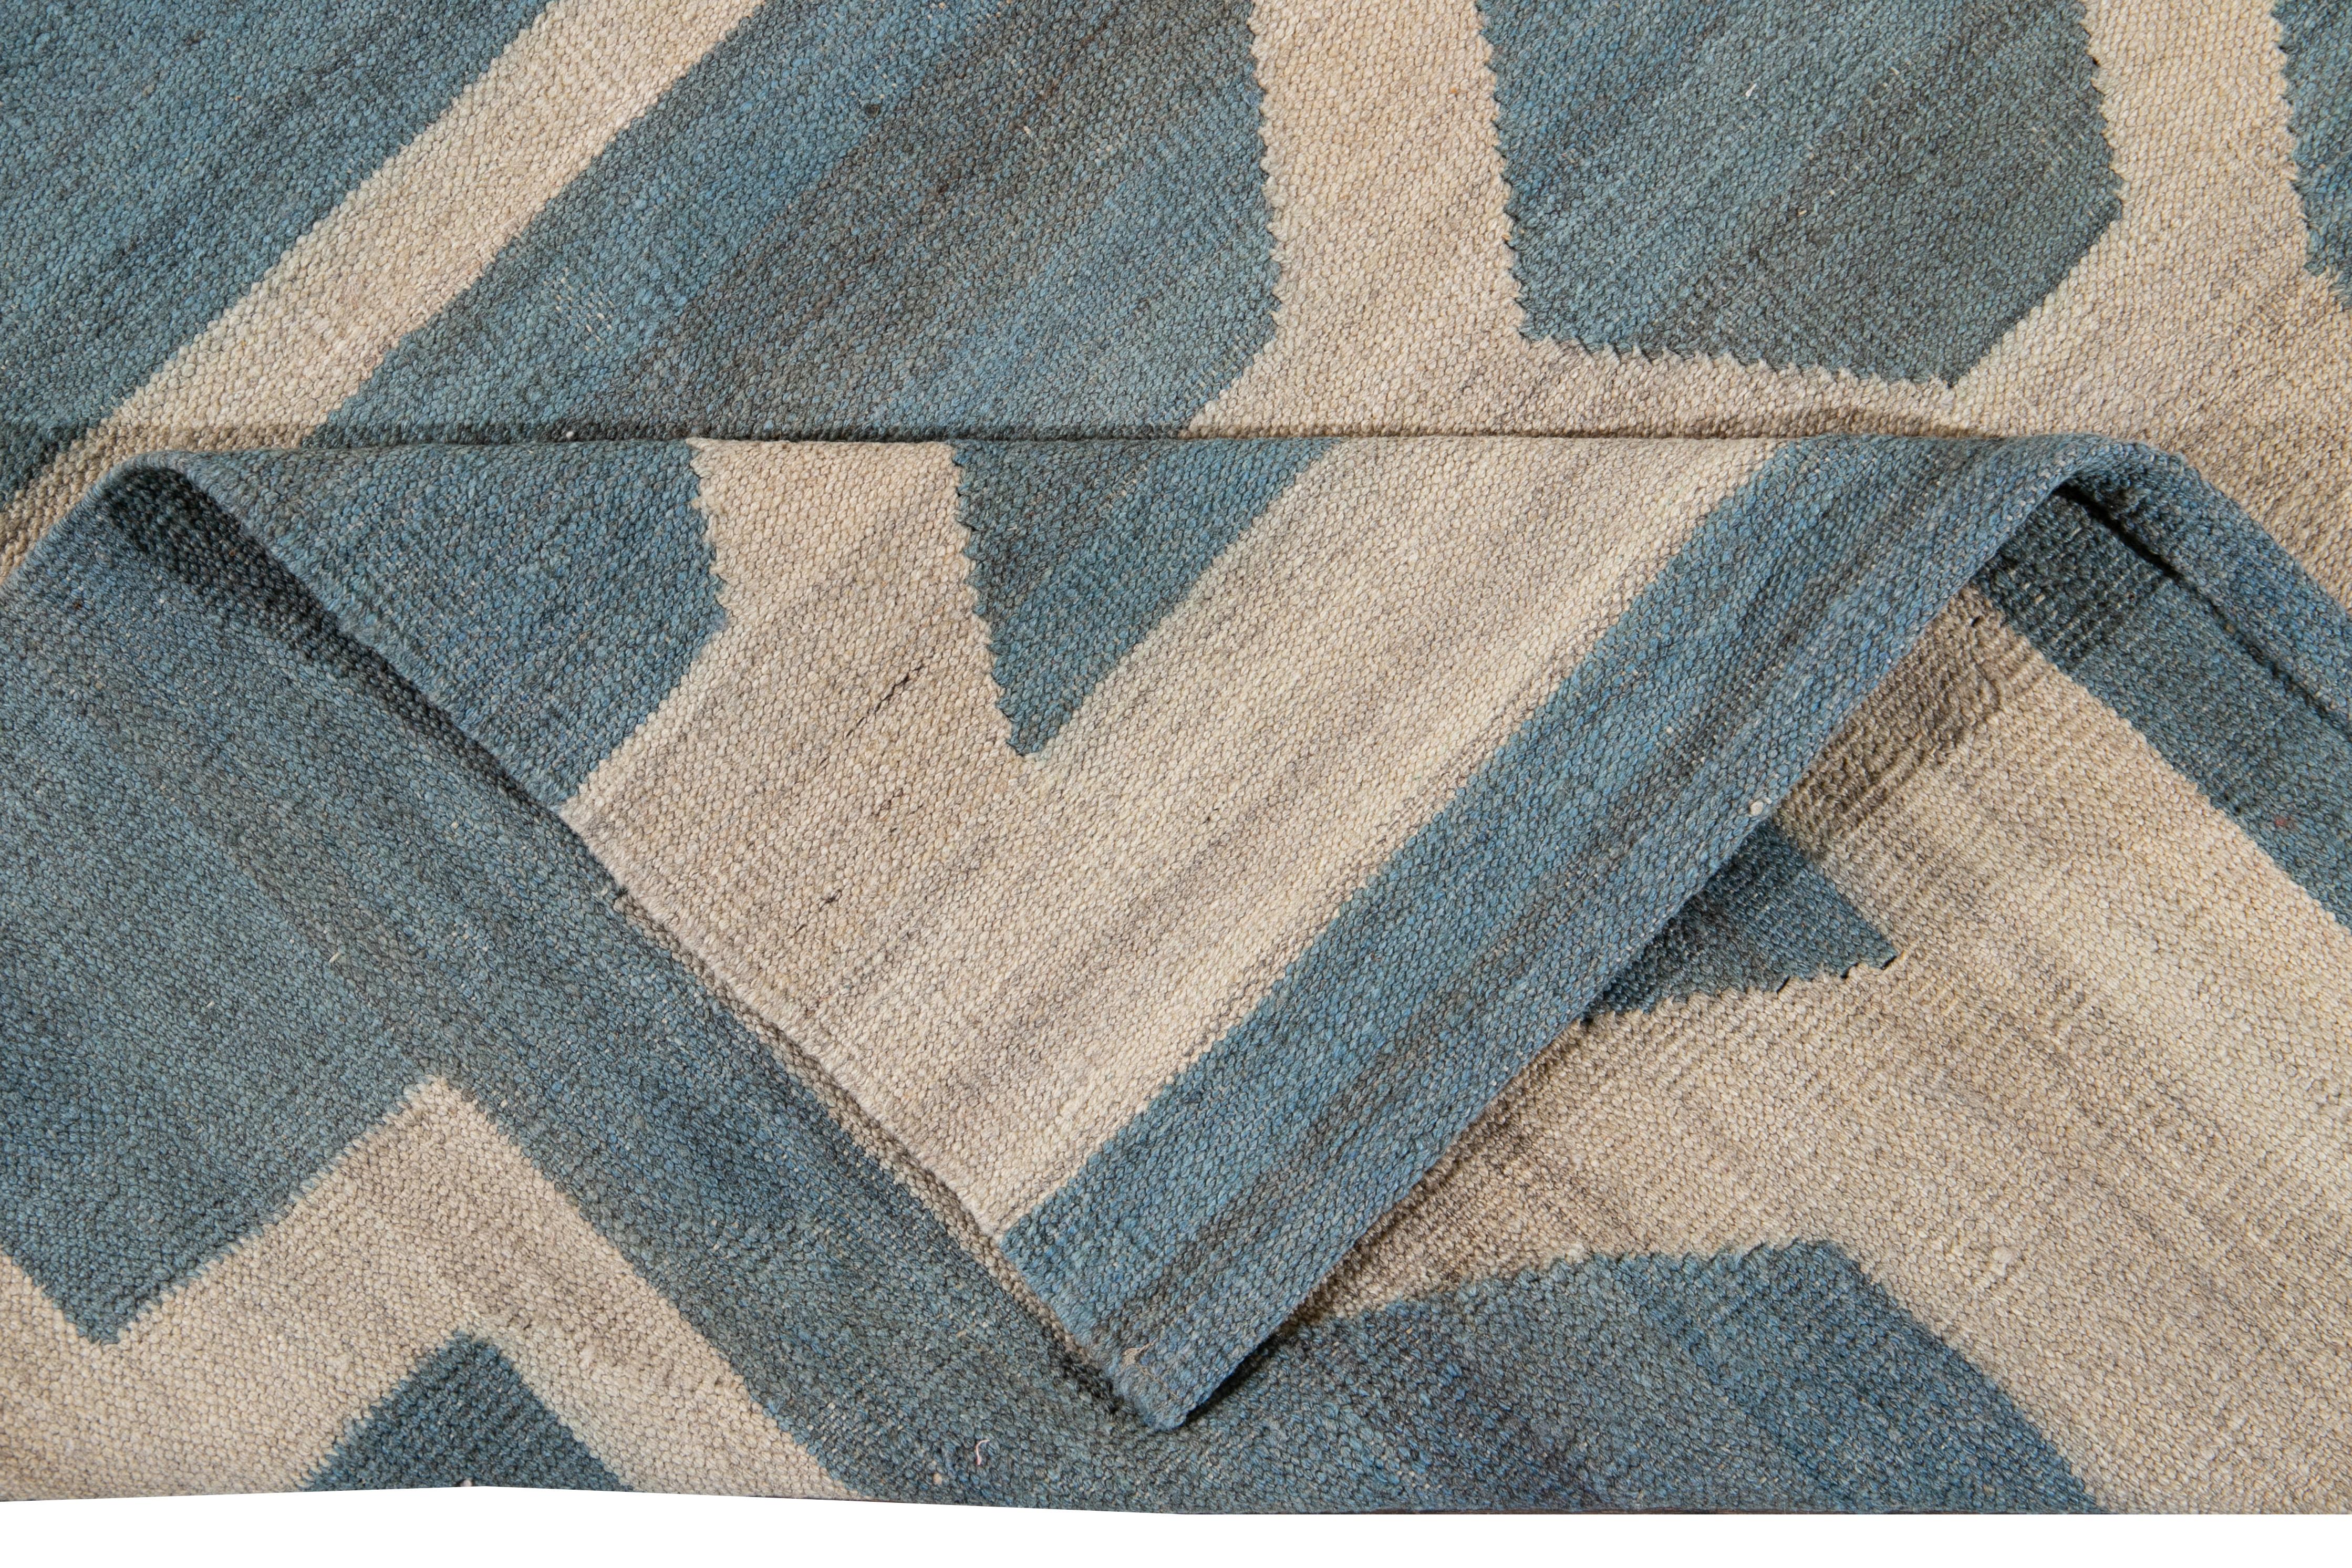 Beautiful modern flat-weave Kilim handmade wool rug with a blue field. This Kilim rug has accents of Ivory and brown in a gorgeous geometric expressionist design.

This rug measures: 9'11